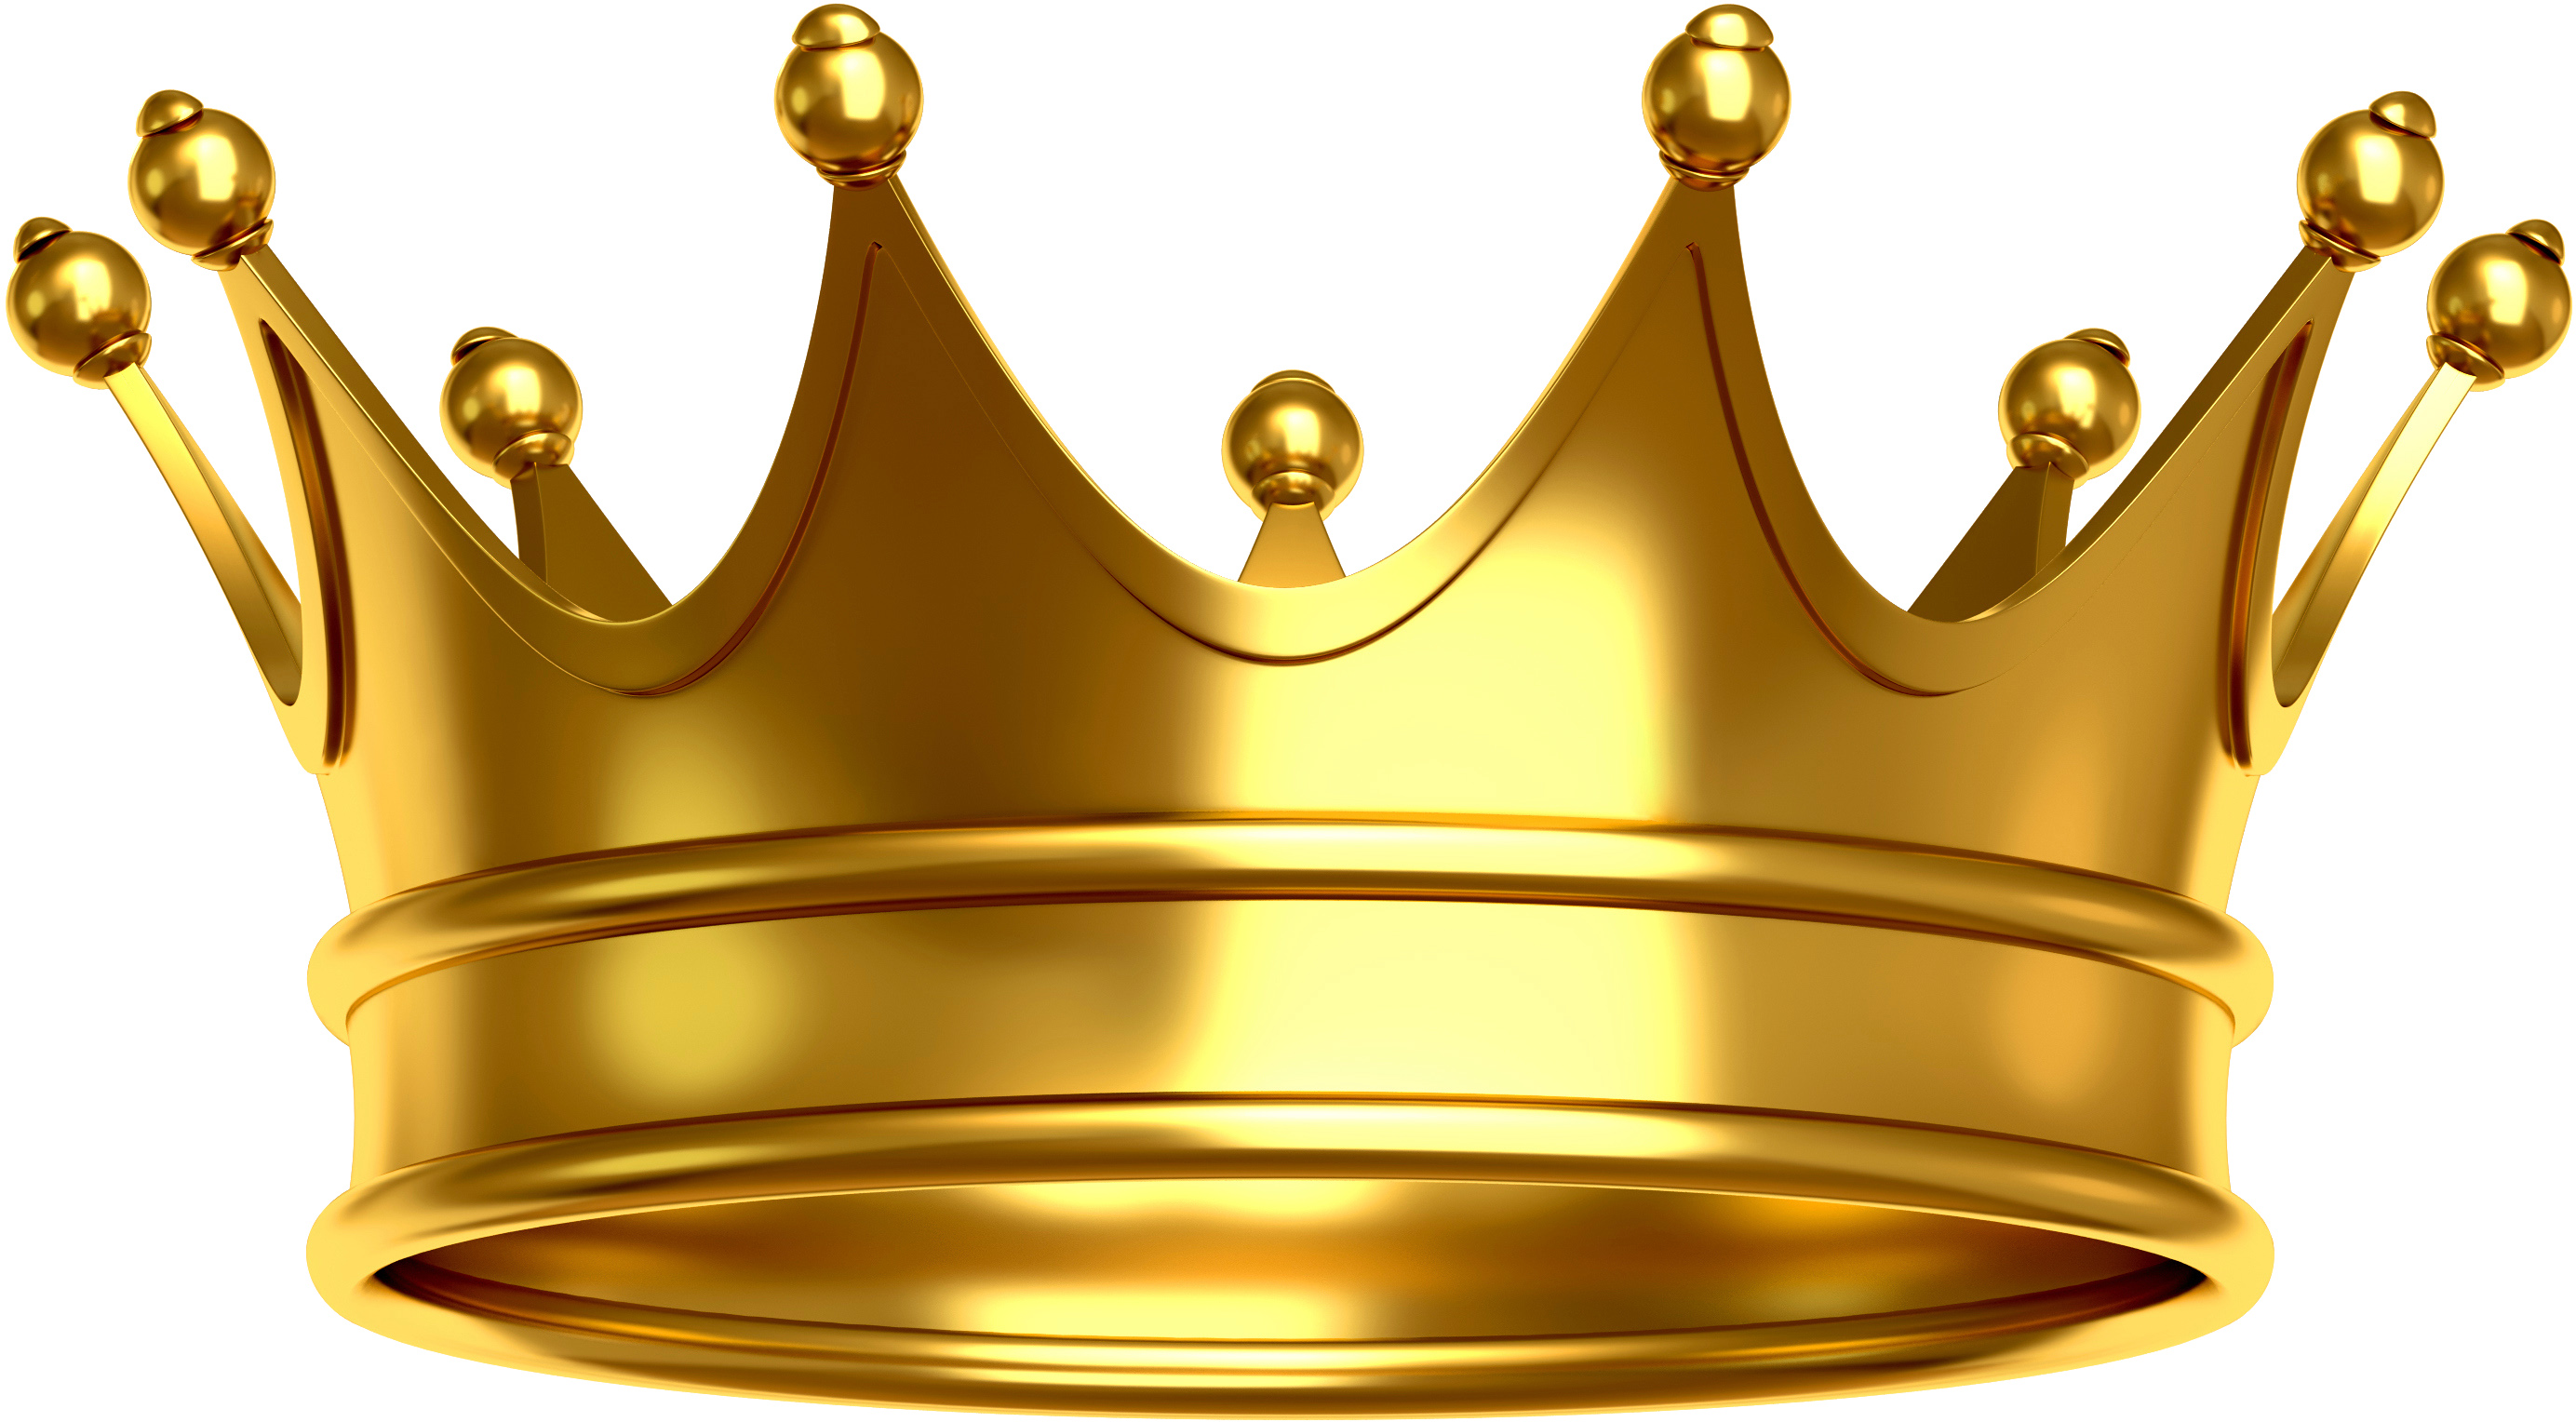 Crown   Free Images At Clker Com   Vector Clip Art Online Royalty